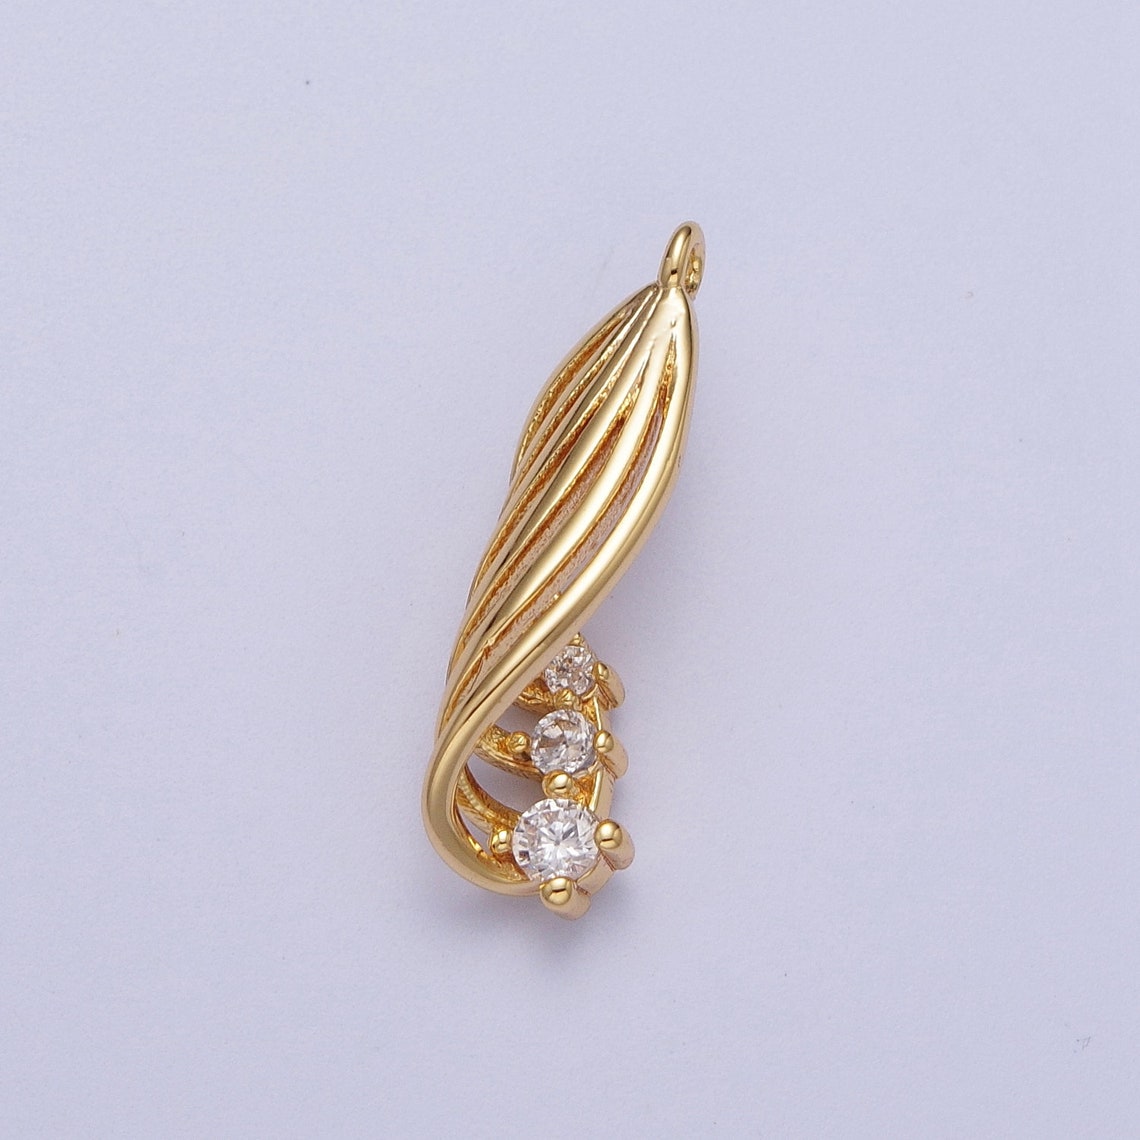 24K Gold Filled Palm Leaves Swirl Leaves Charm CZ Stone - Etsy